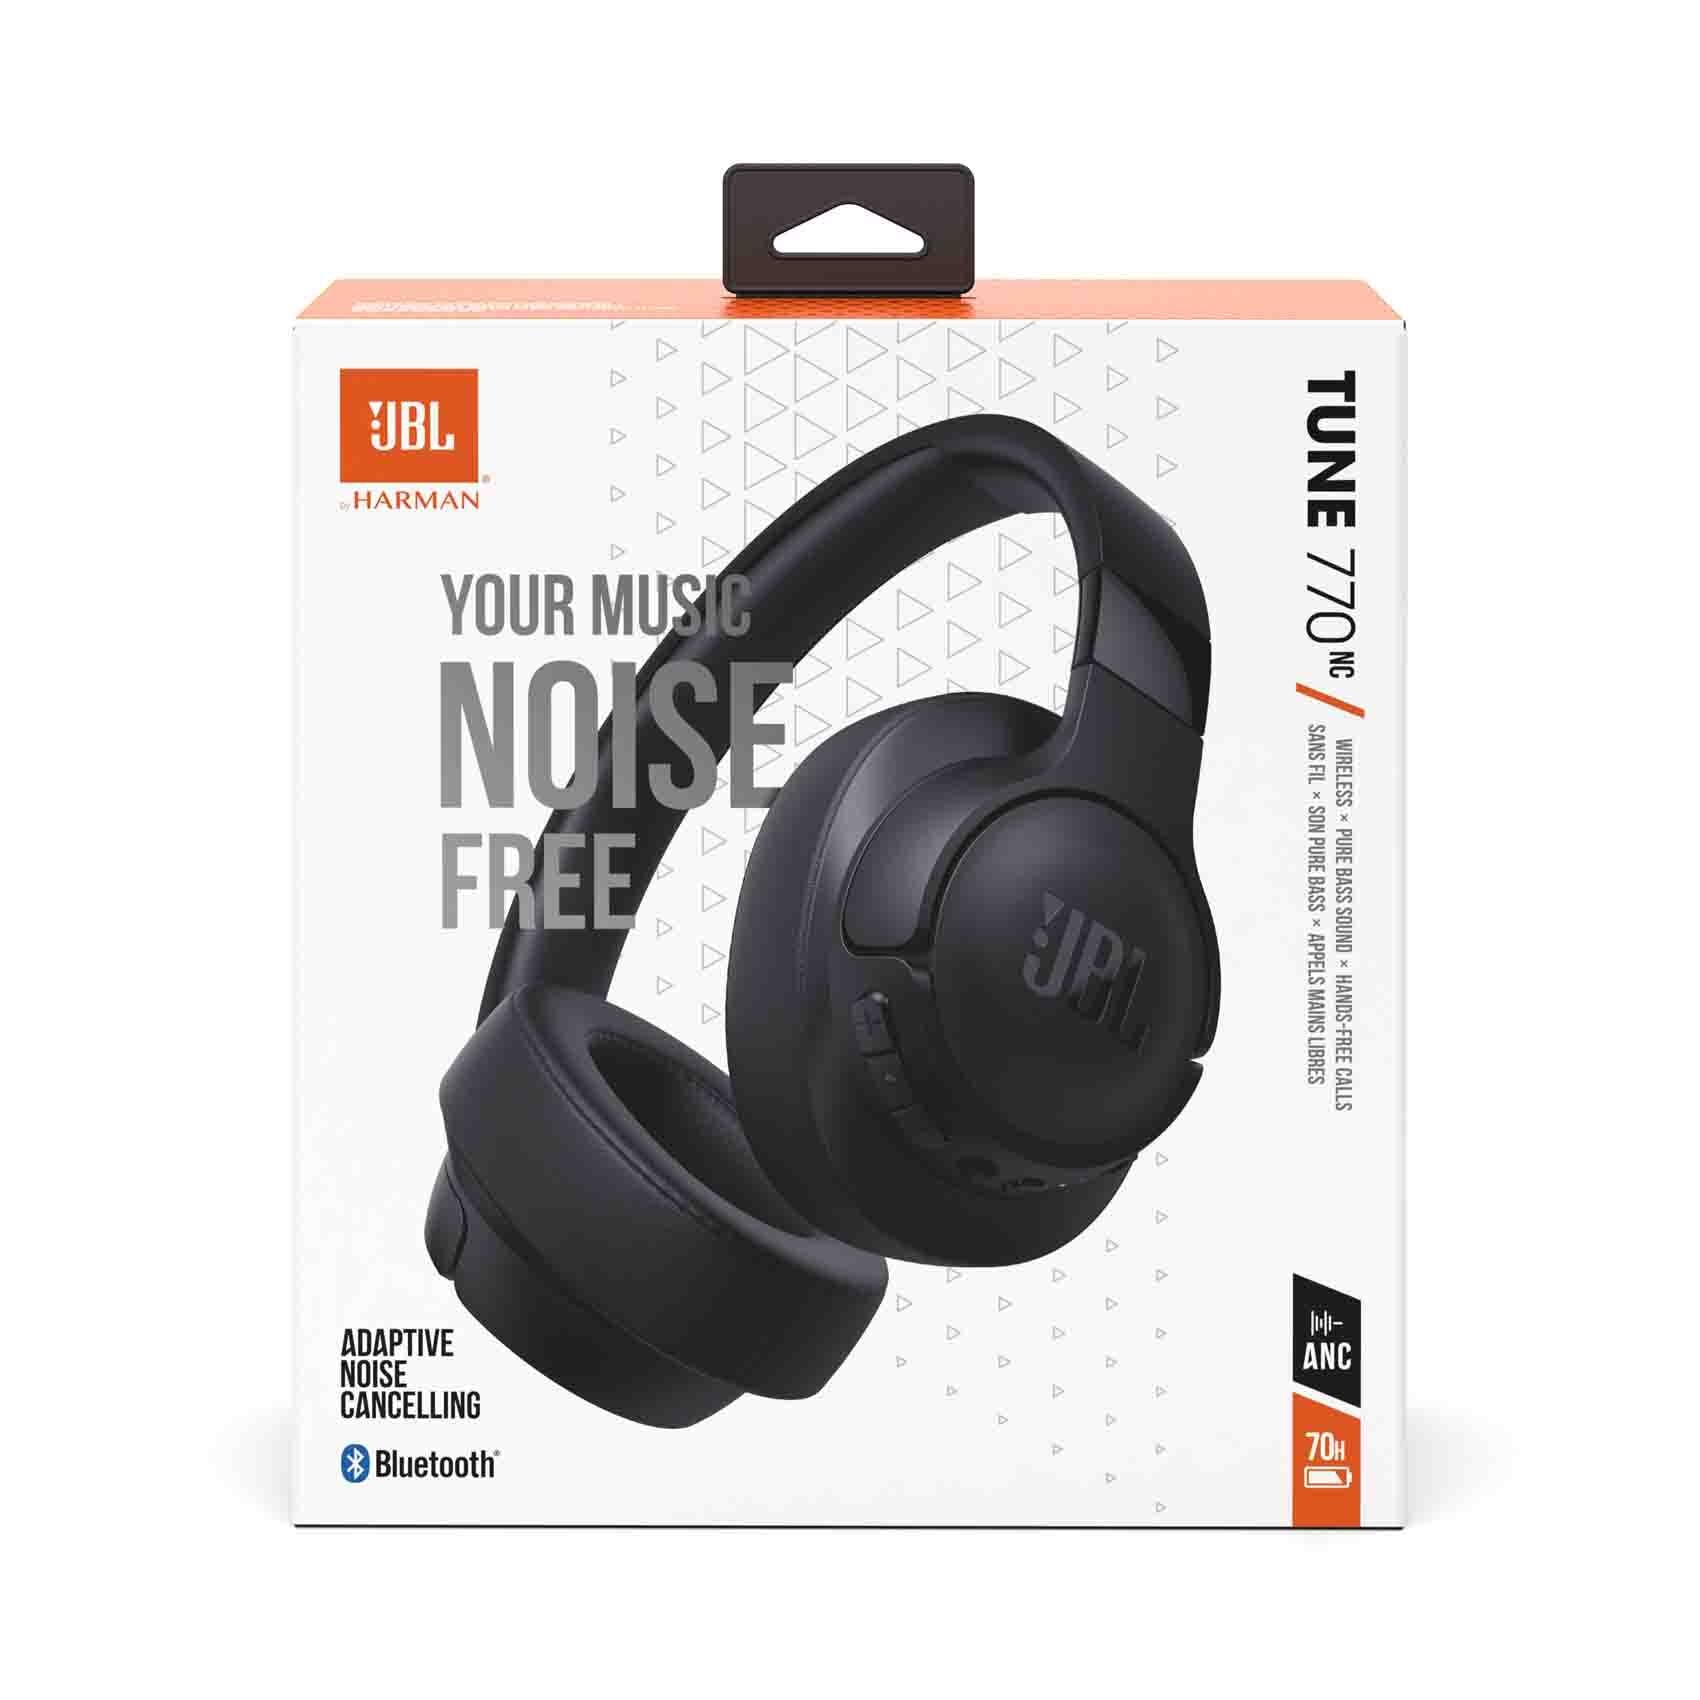 JBL Tune 760NC T760NC Bluetooth 5.0 Headphone ANC Active Noise Cancelling  Multi-Point Connections Wired Wireless